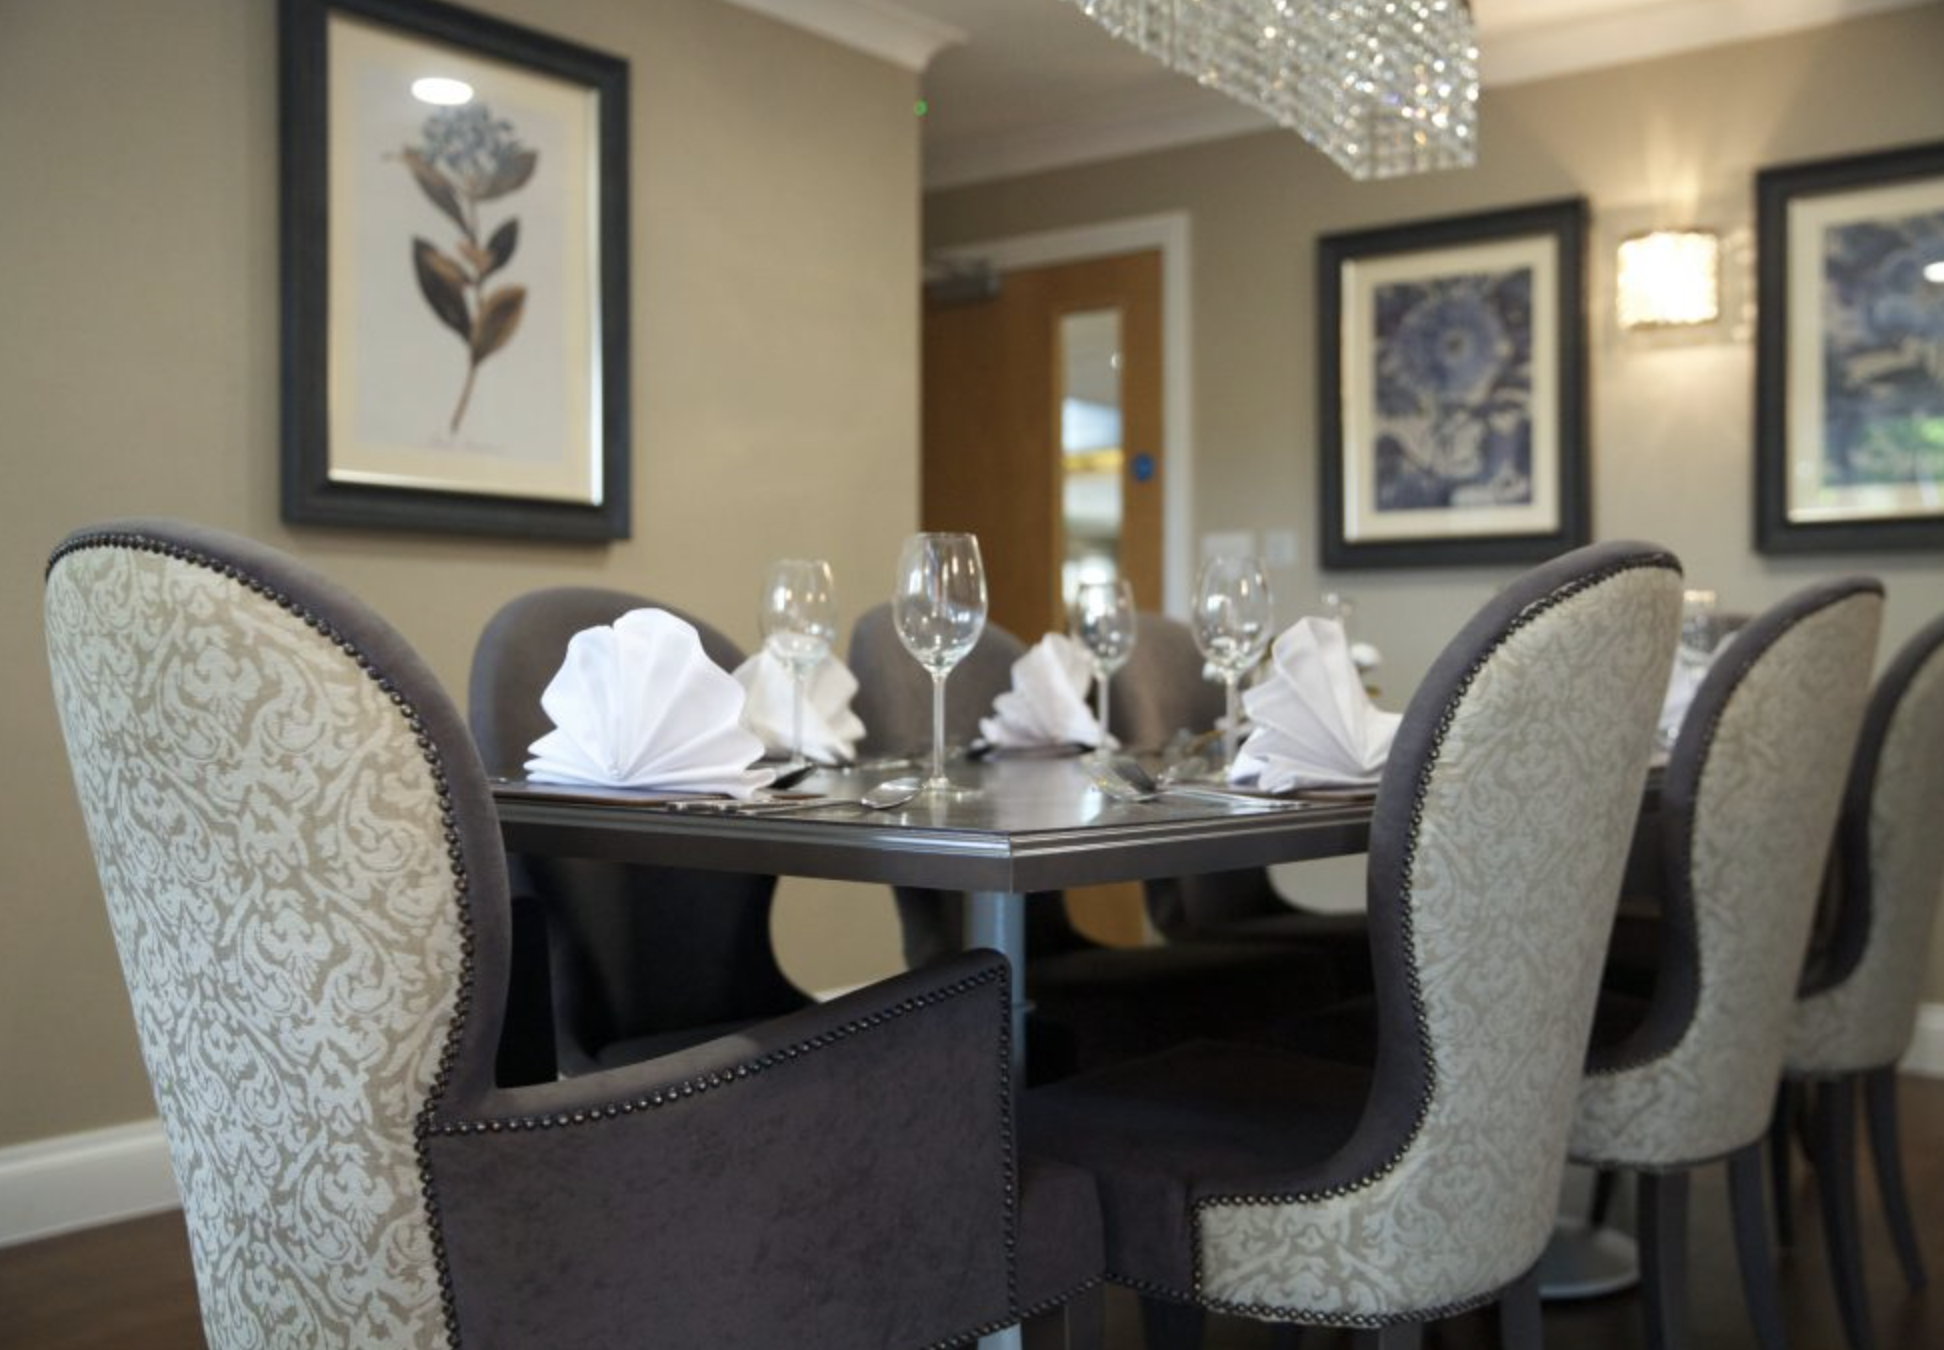 Private dining area of Carlton Court care home in Barnet, London